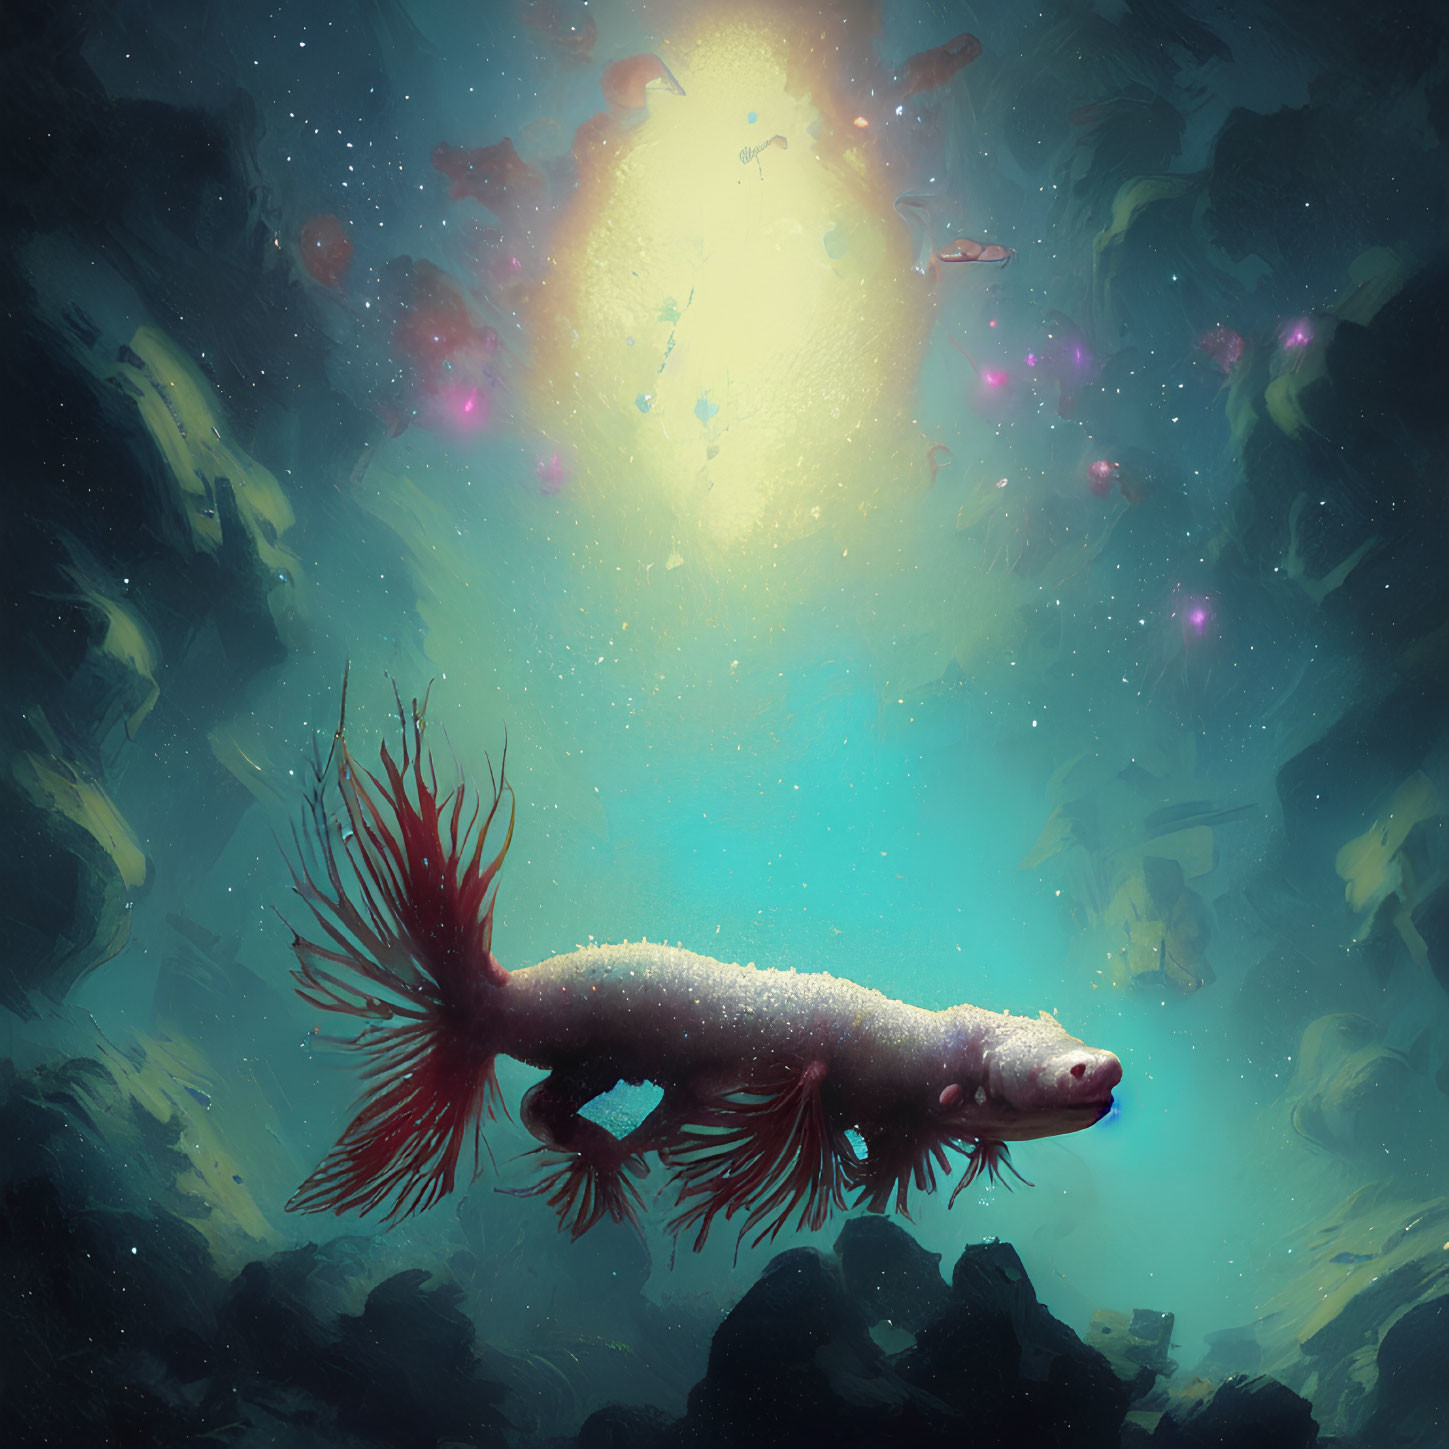 Vibrant red gills on axolotl-like creature in ethereal underwater scene